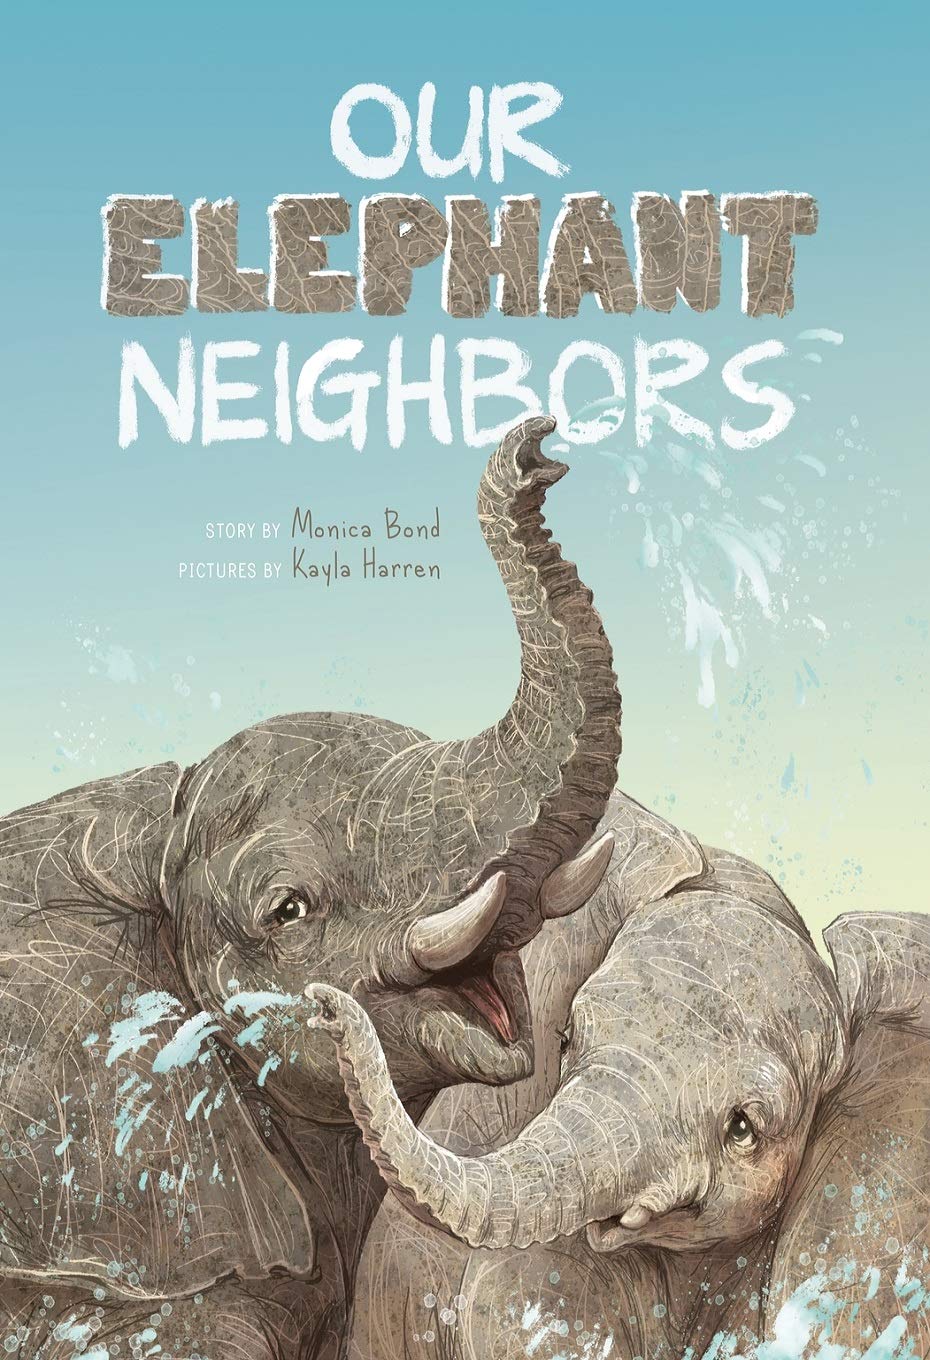 Cover of the book Our Elephant Neighbors. Features two elephants spraying water from their trunks.